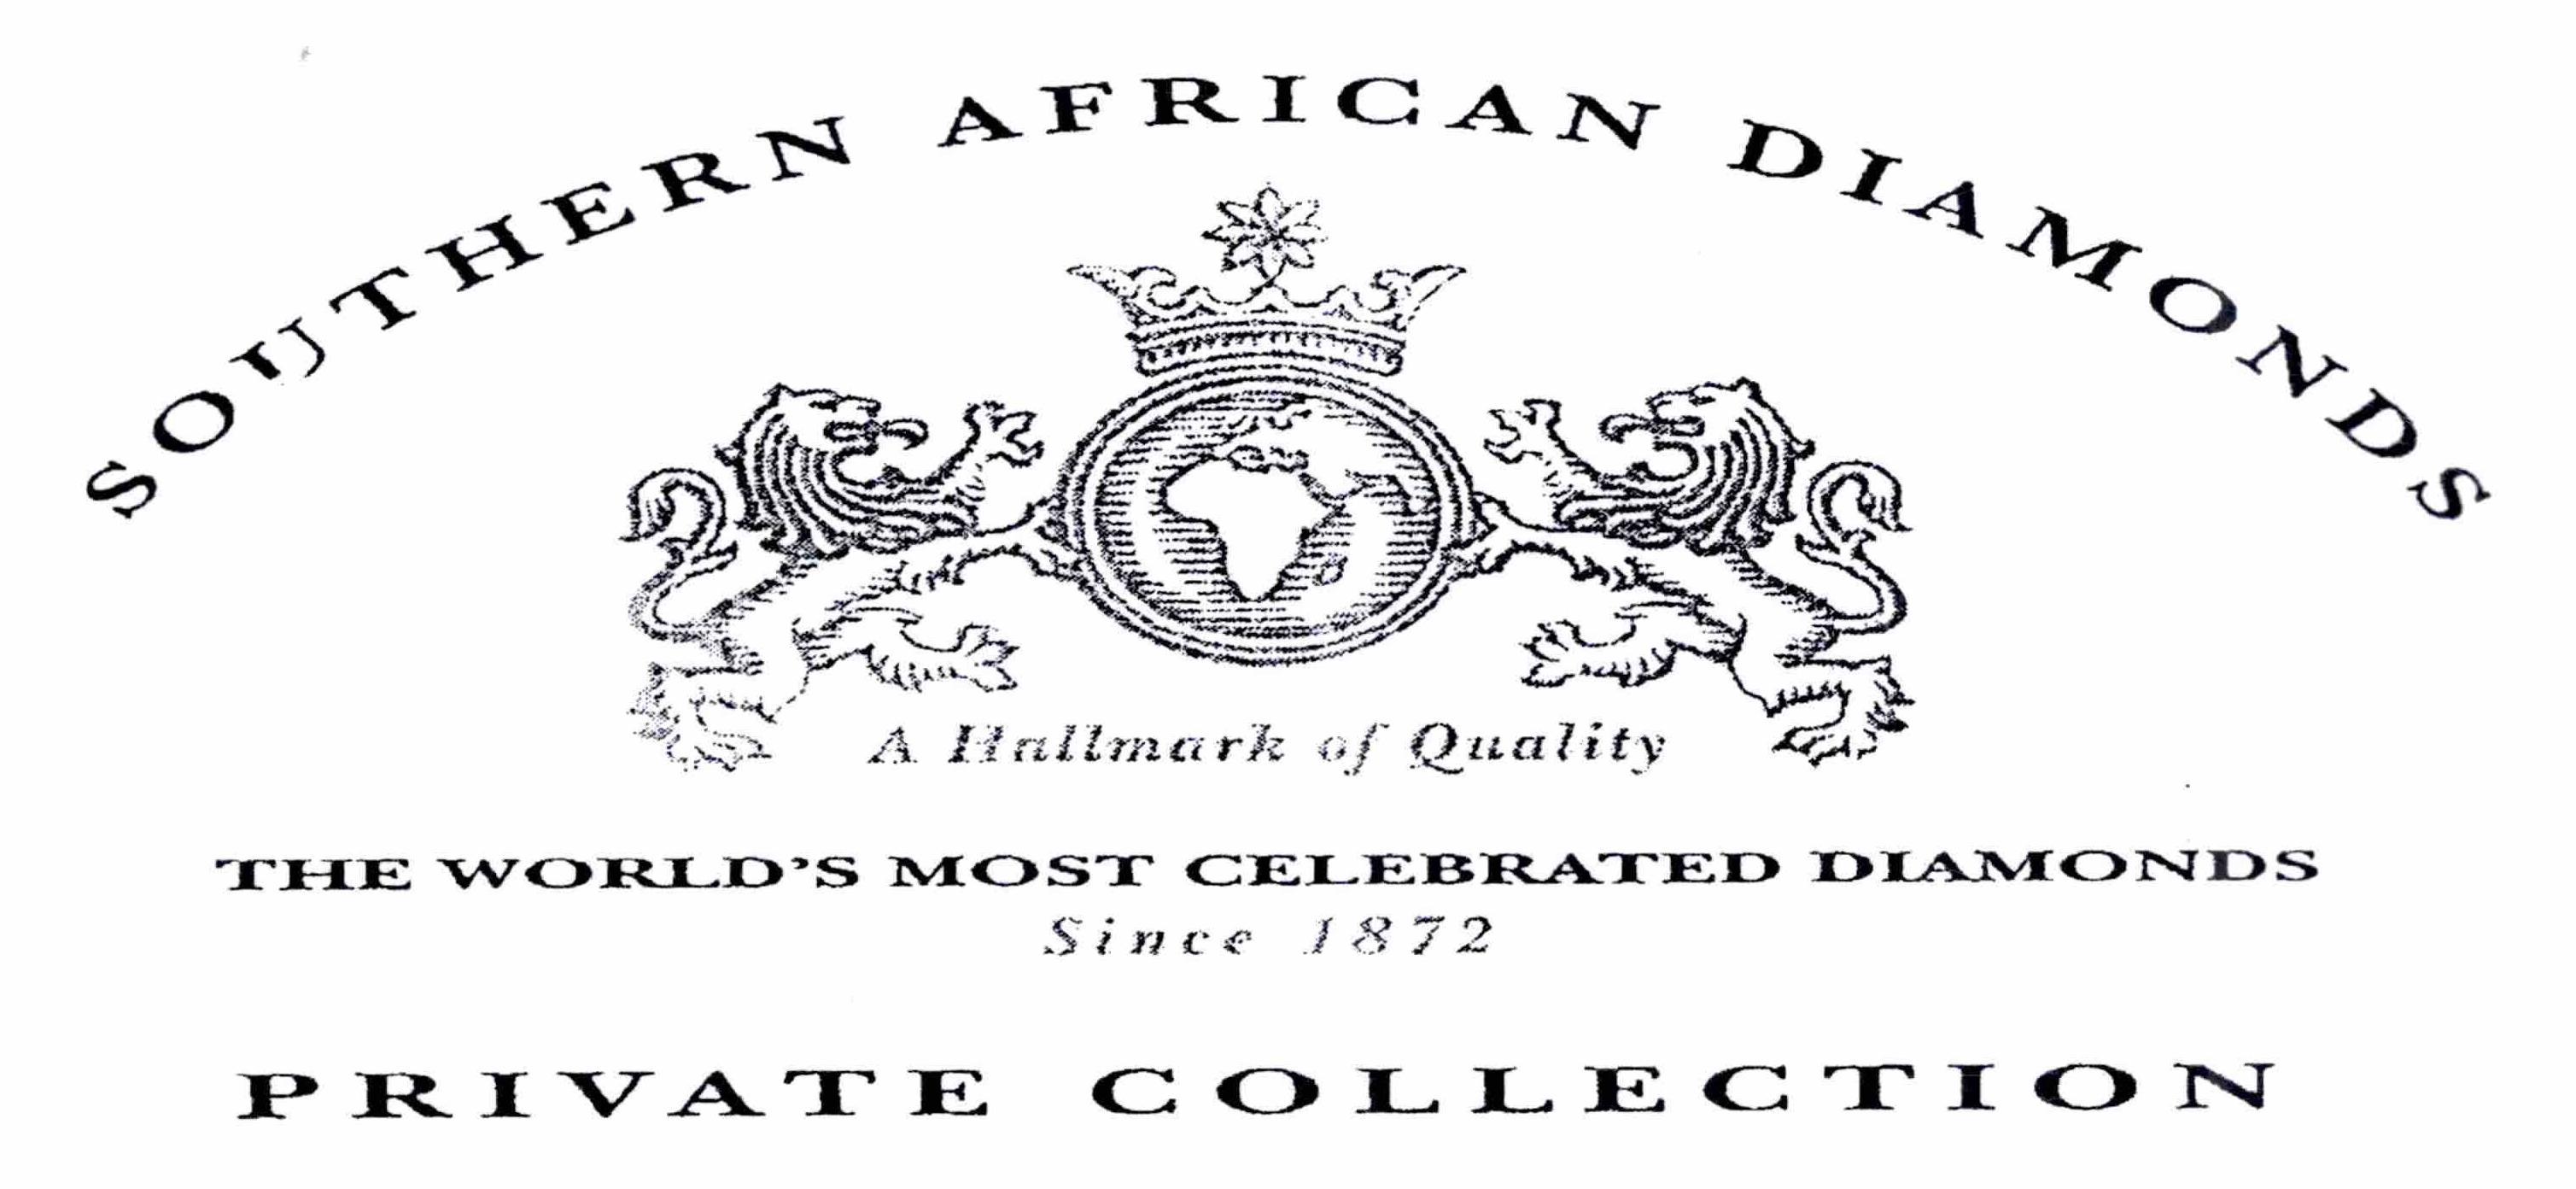  SOUTHERN AFRICAN DIAMONDS A HALLMARK OF QUALITY THE WORLD'S MOST CELEBRATED DIAMONDS SINCE 1872 PRIVATE COLLECTION